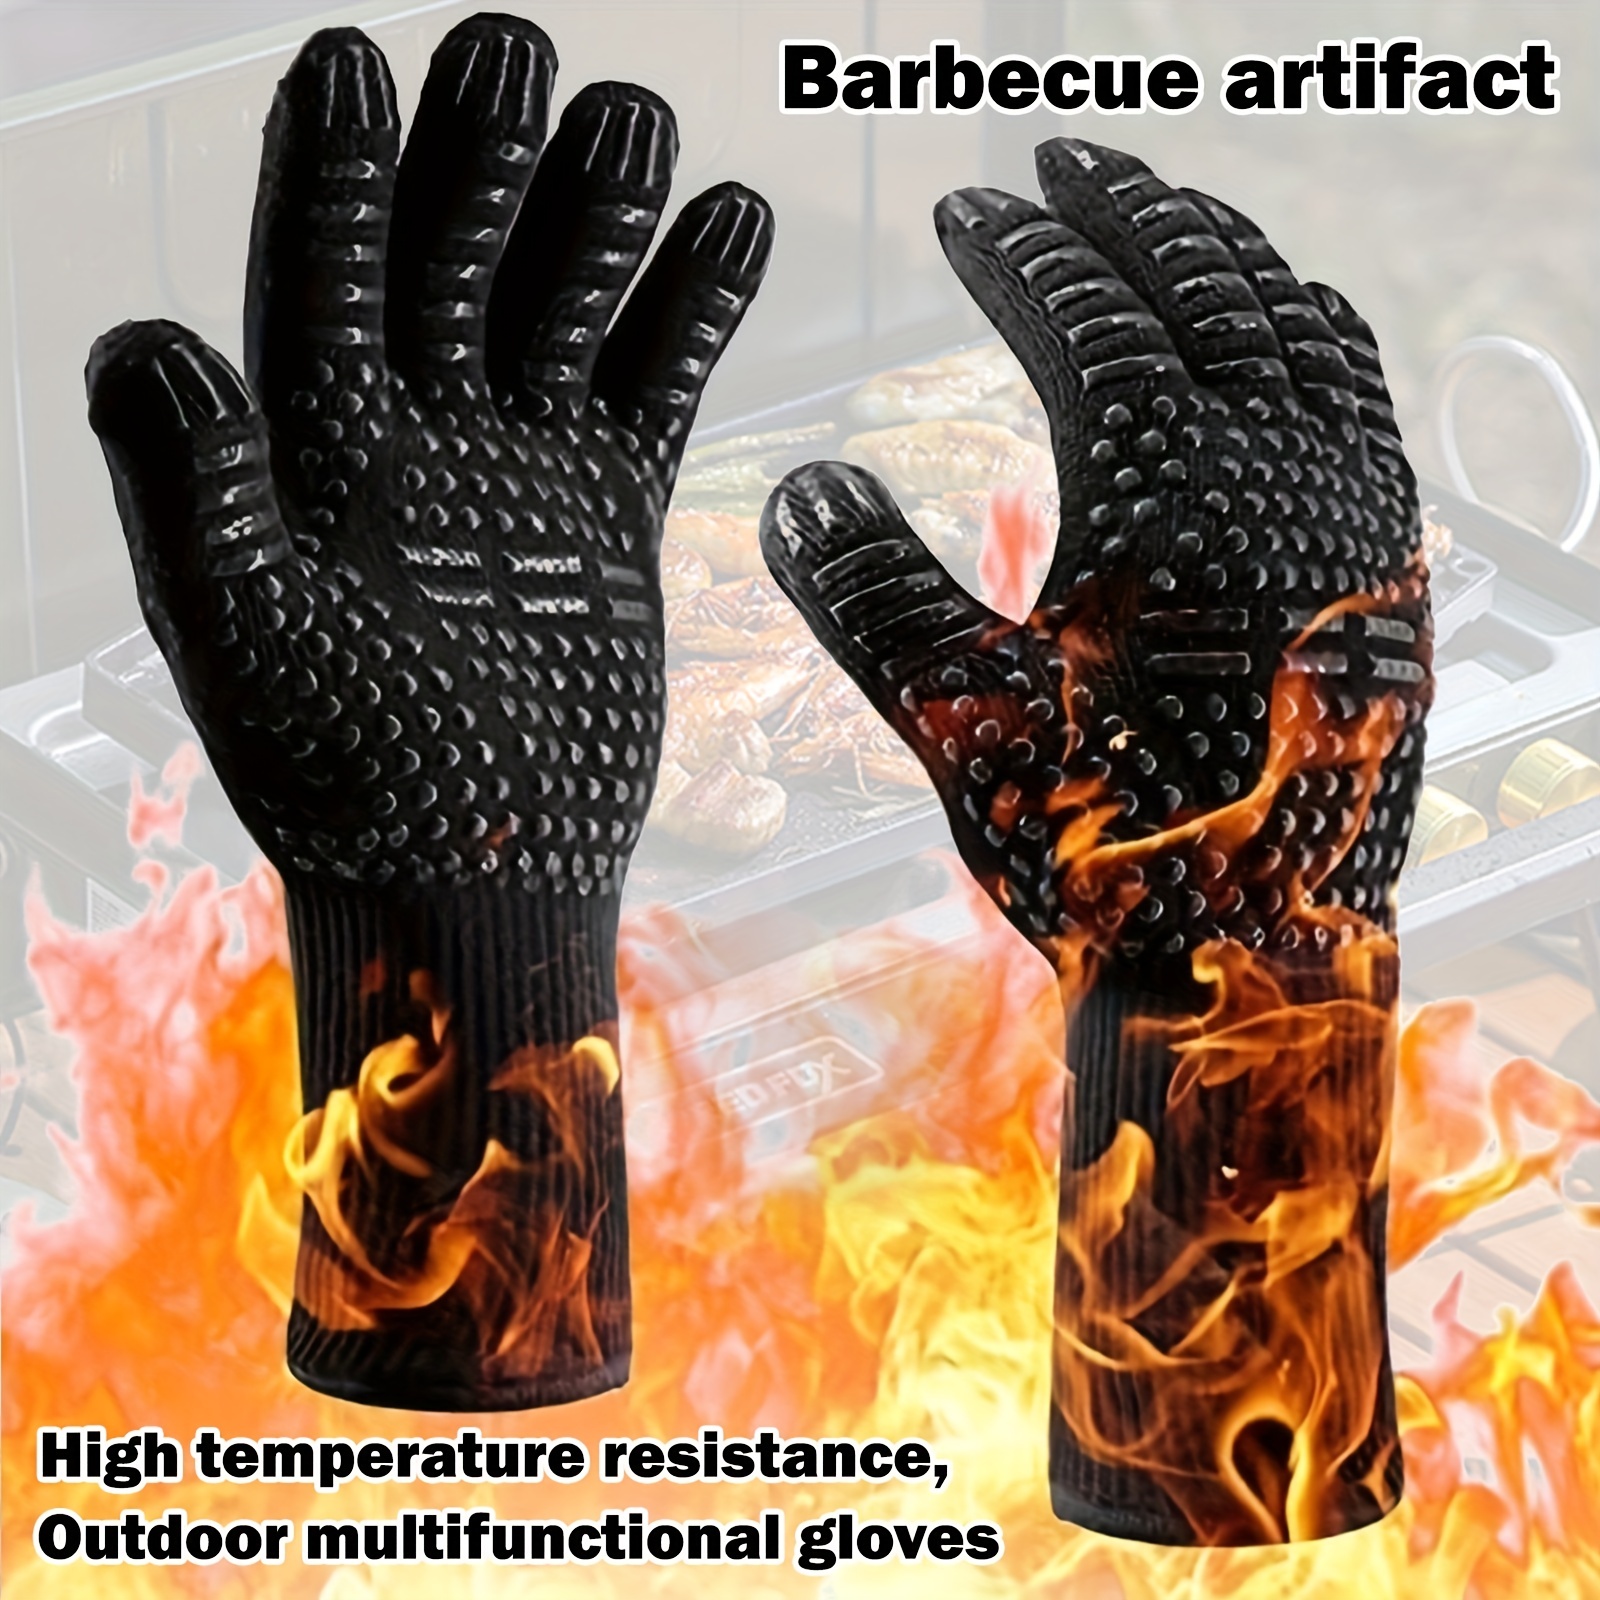 Heat-Resistant Silicone Oven Mitts with Non-Slip Grip - 11'' Waterproof and Durable Cooking Gloves Hot Mitts for Baking, Grilling, and Outdoor